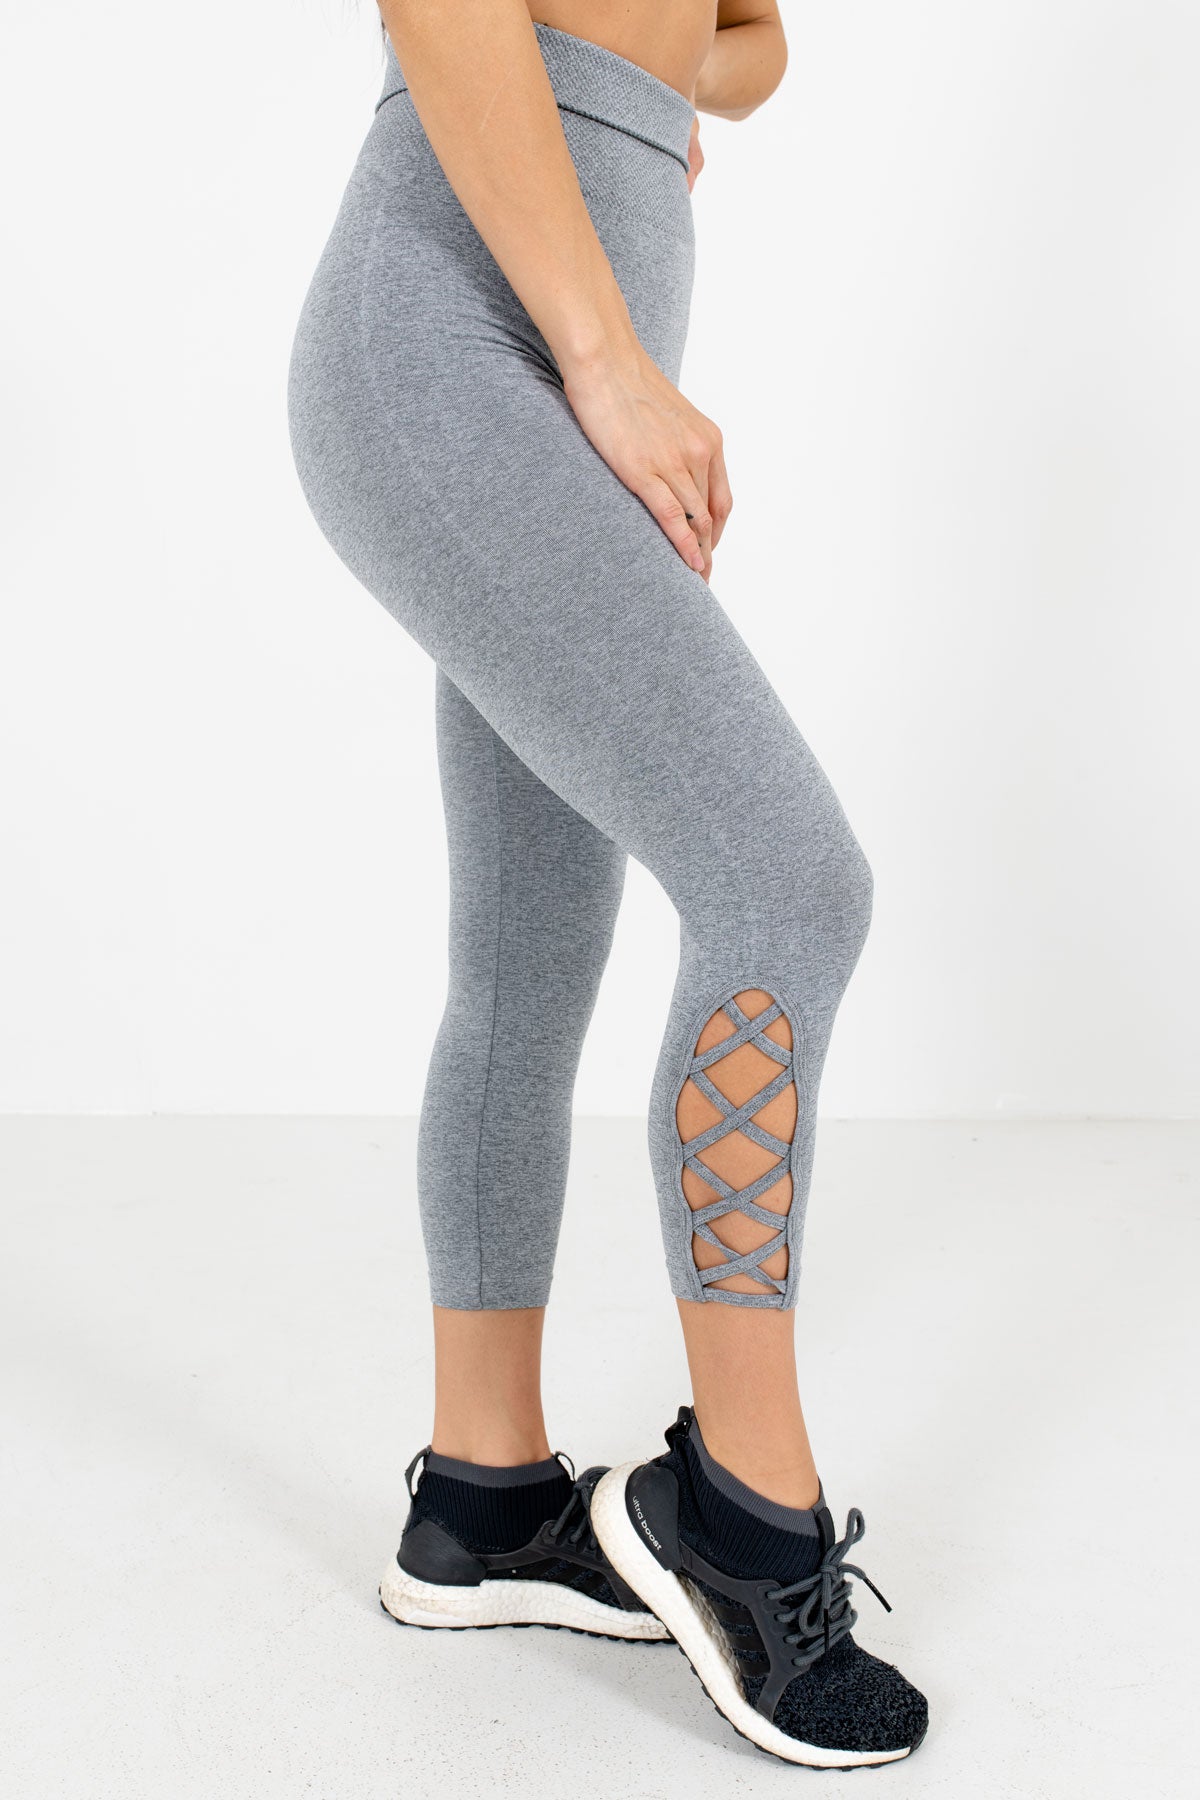 Heather Gray High Waisted Style Boutique Active Leggings for Women